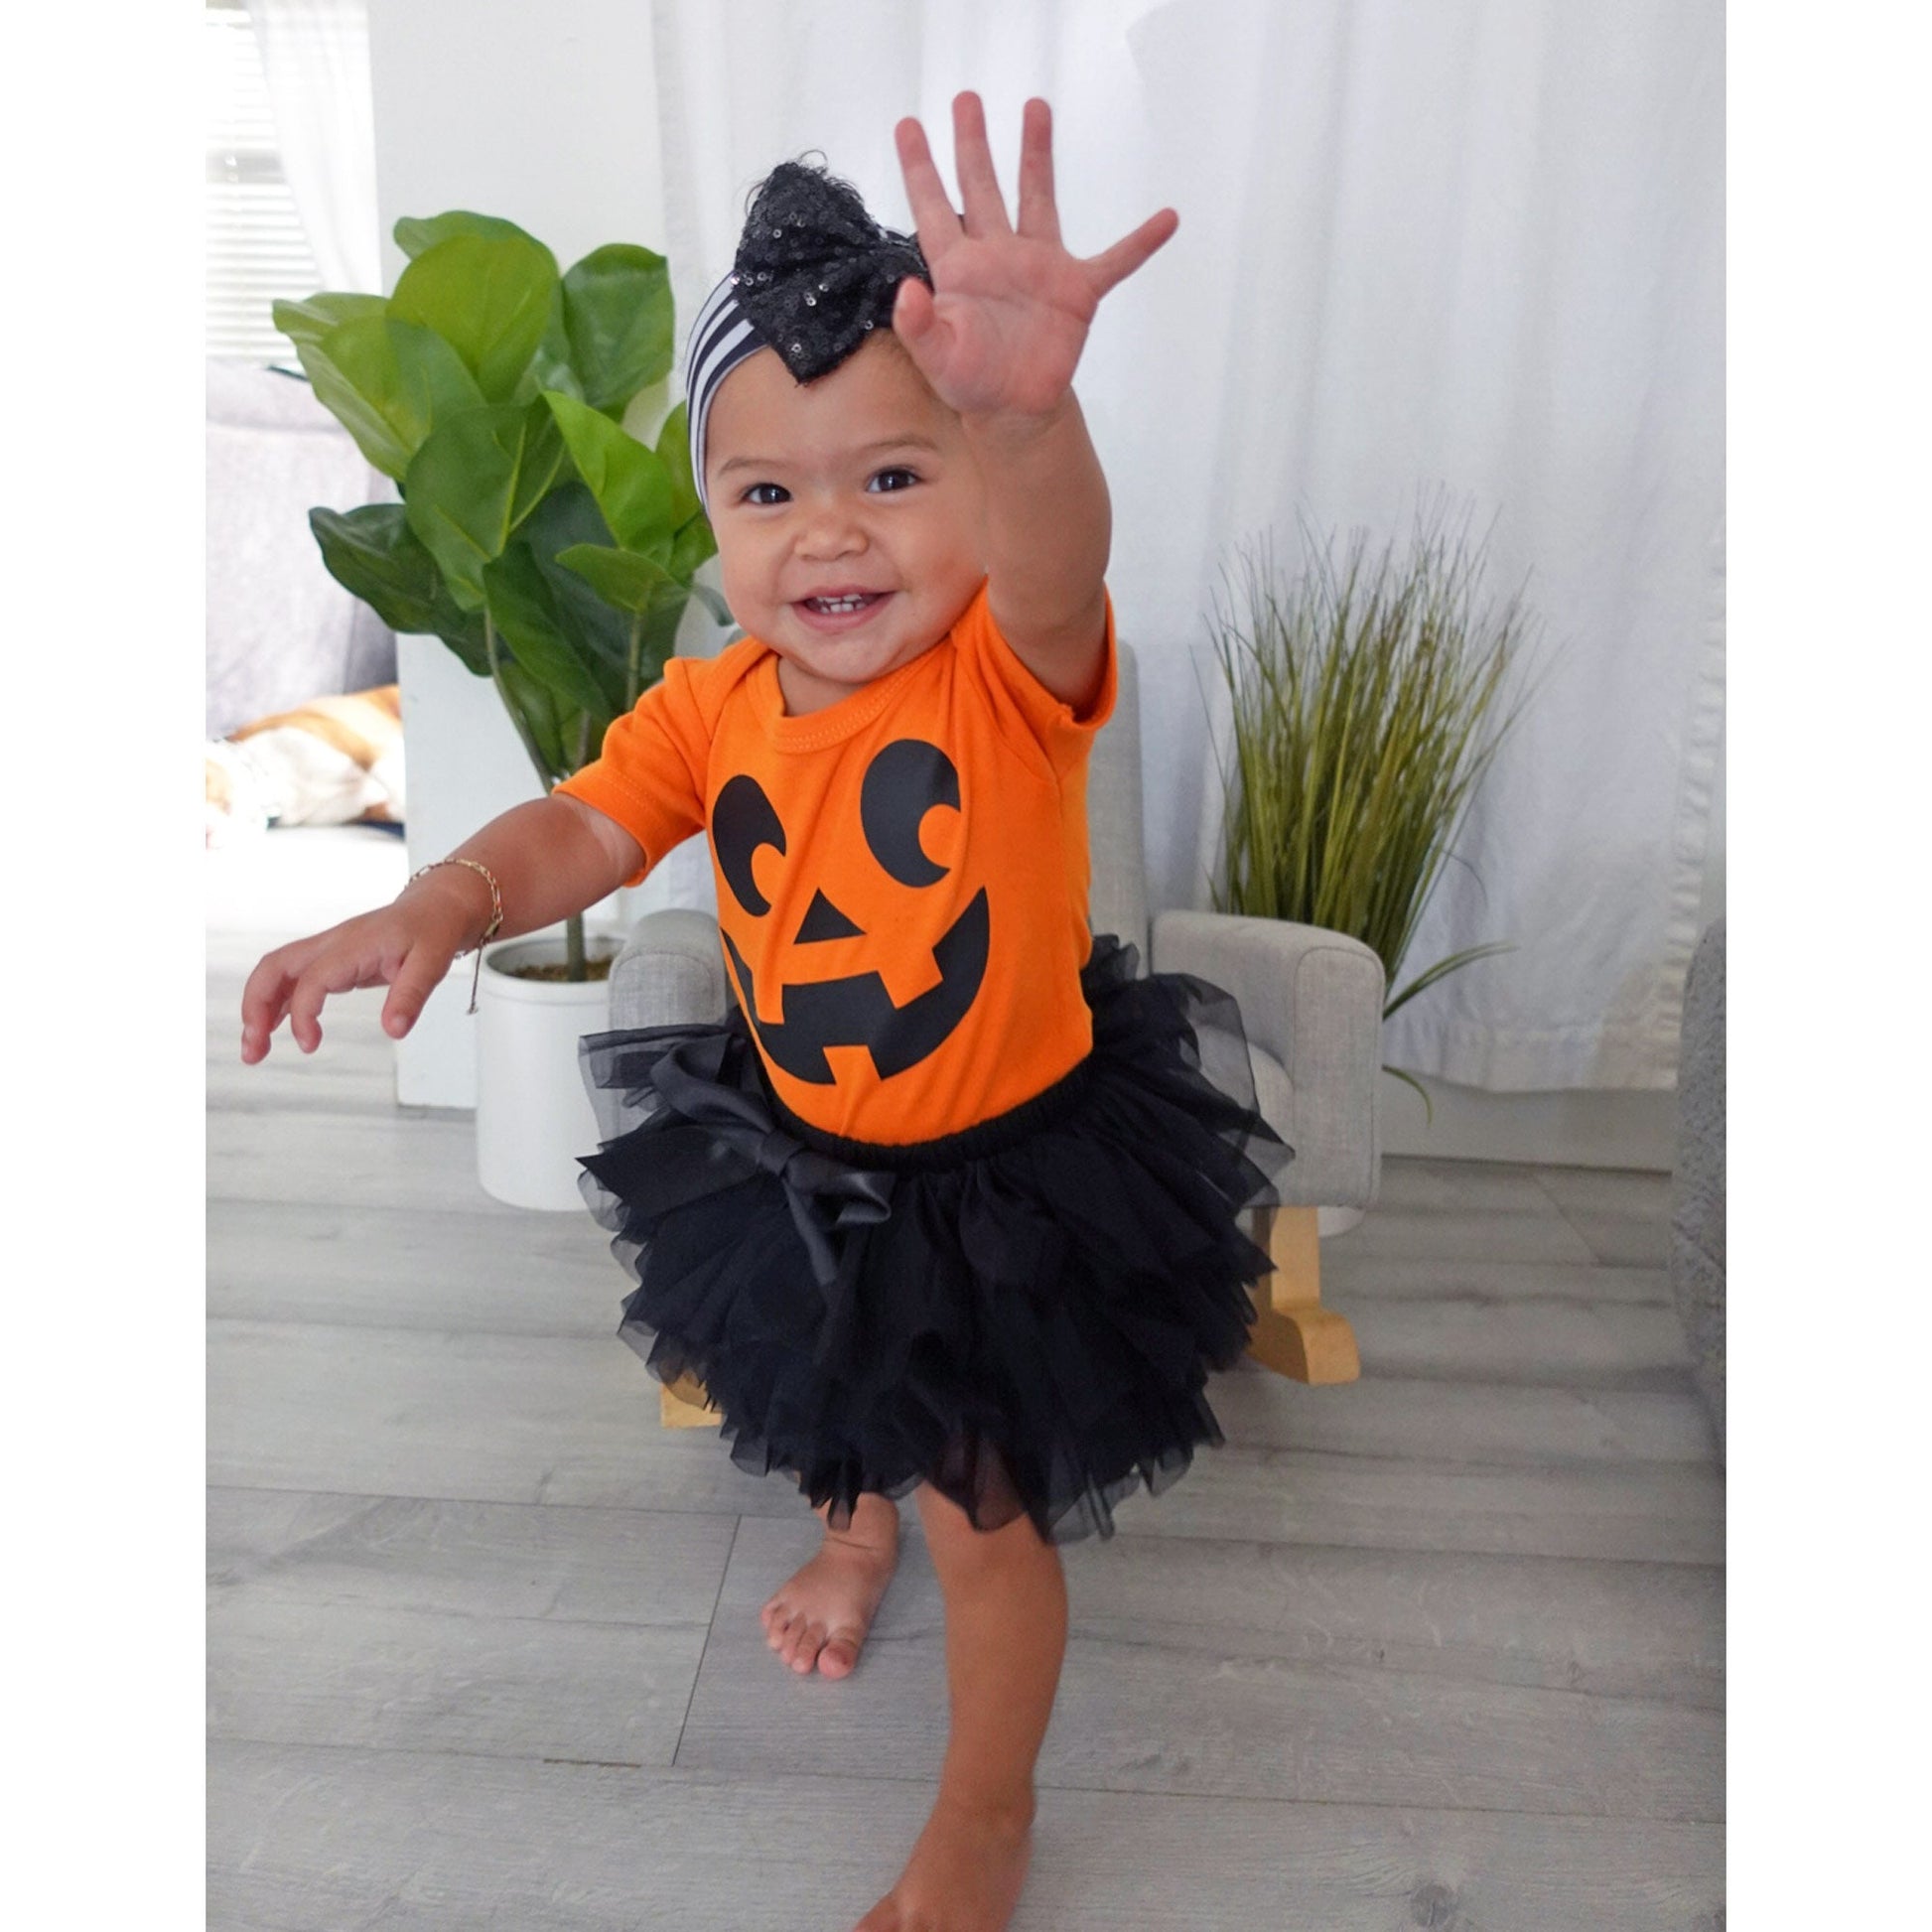 Smiling Jack O lantern Baby Outfit, Baby's 1st Halloween, Baby Pumpkin Costume